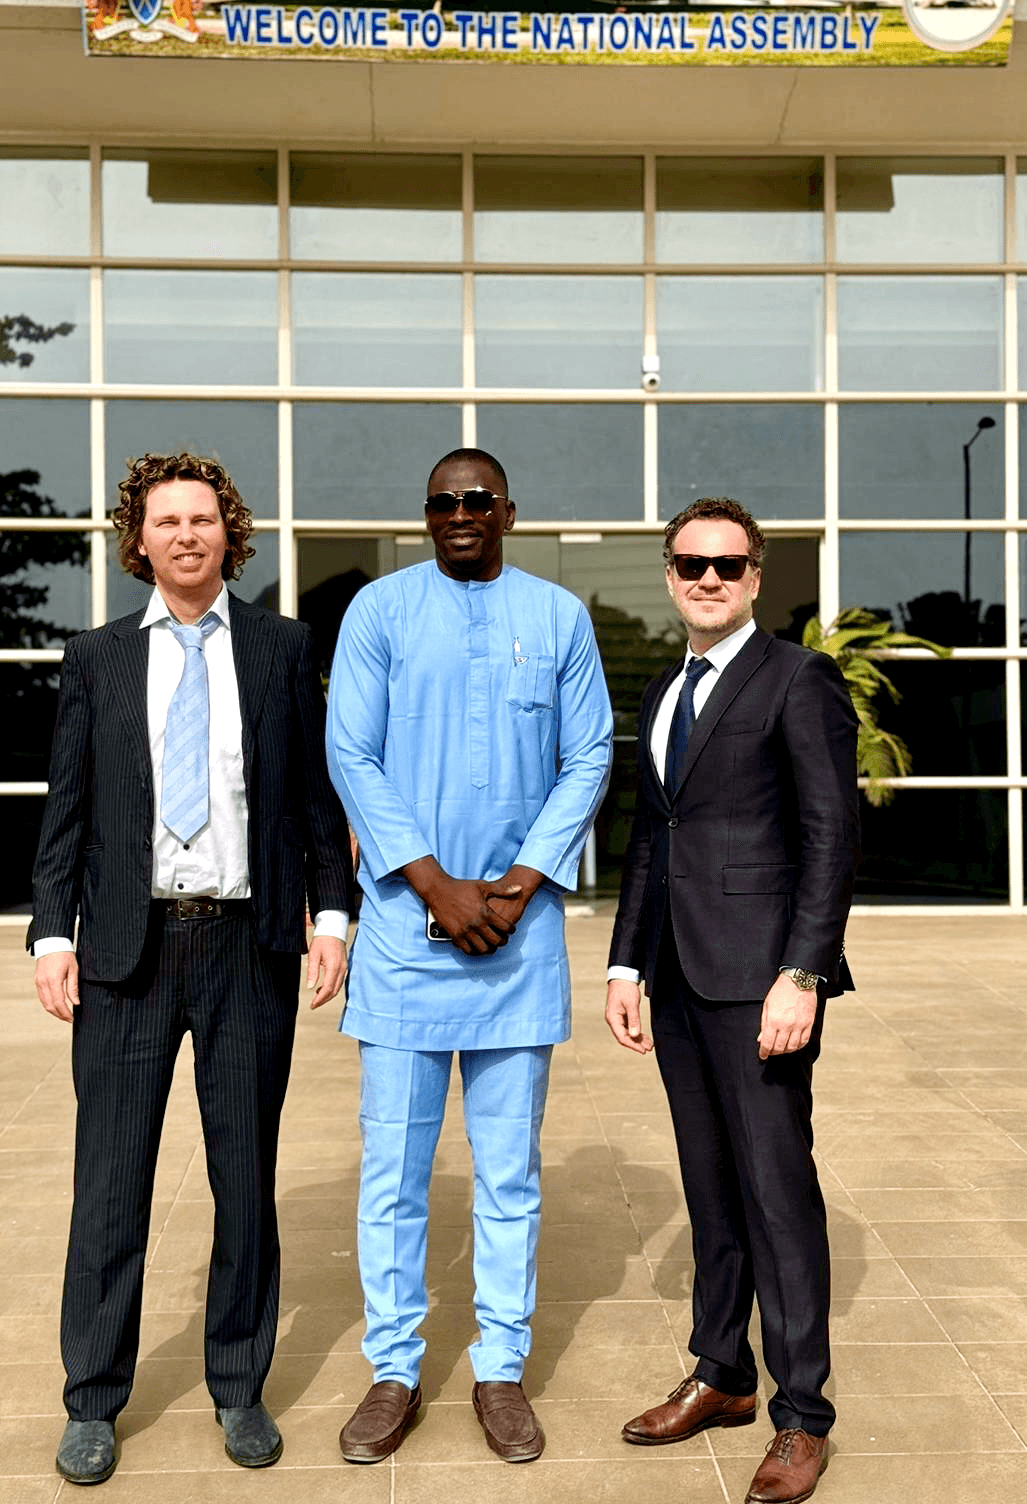 f.l.t.r.; Roger Modderkolk, deputy majority leader Hon. Abdoulay Ceesay, Aurus CEO Guido van Stijn in front of The National Assembly